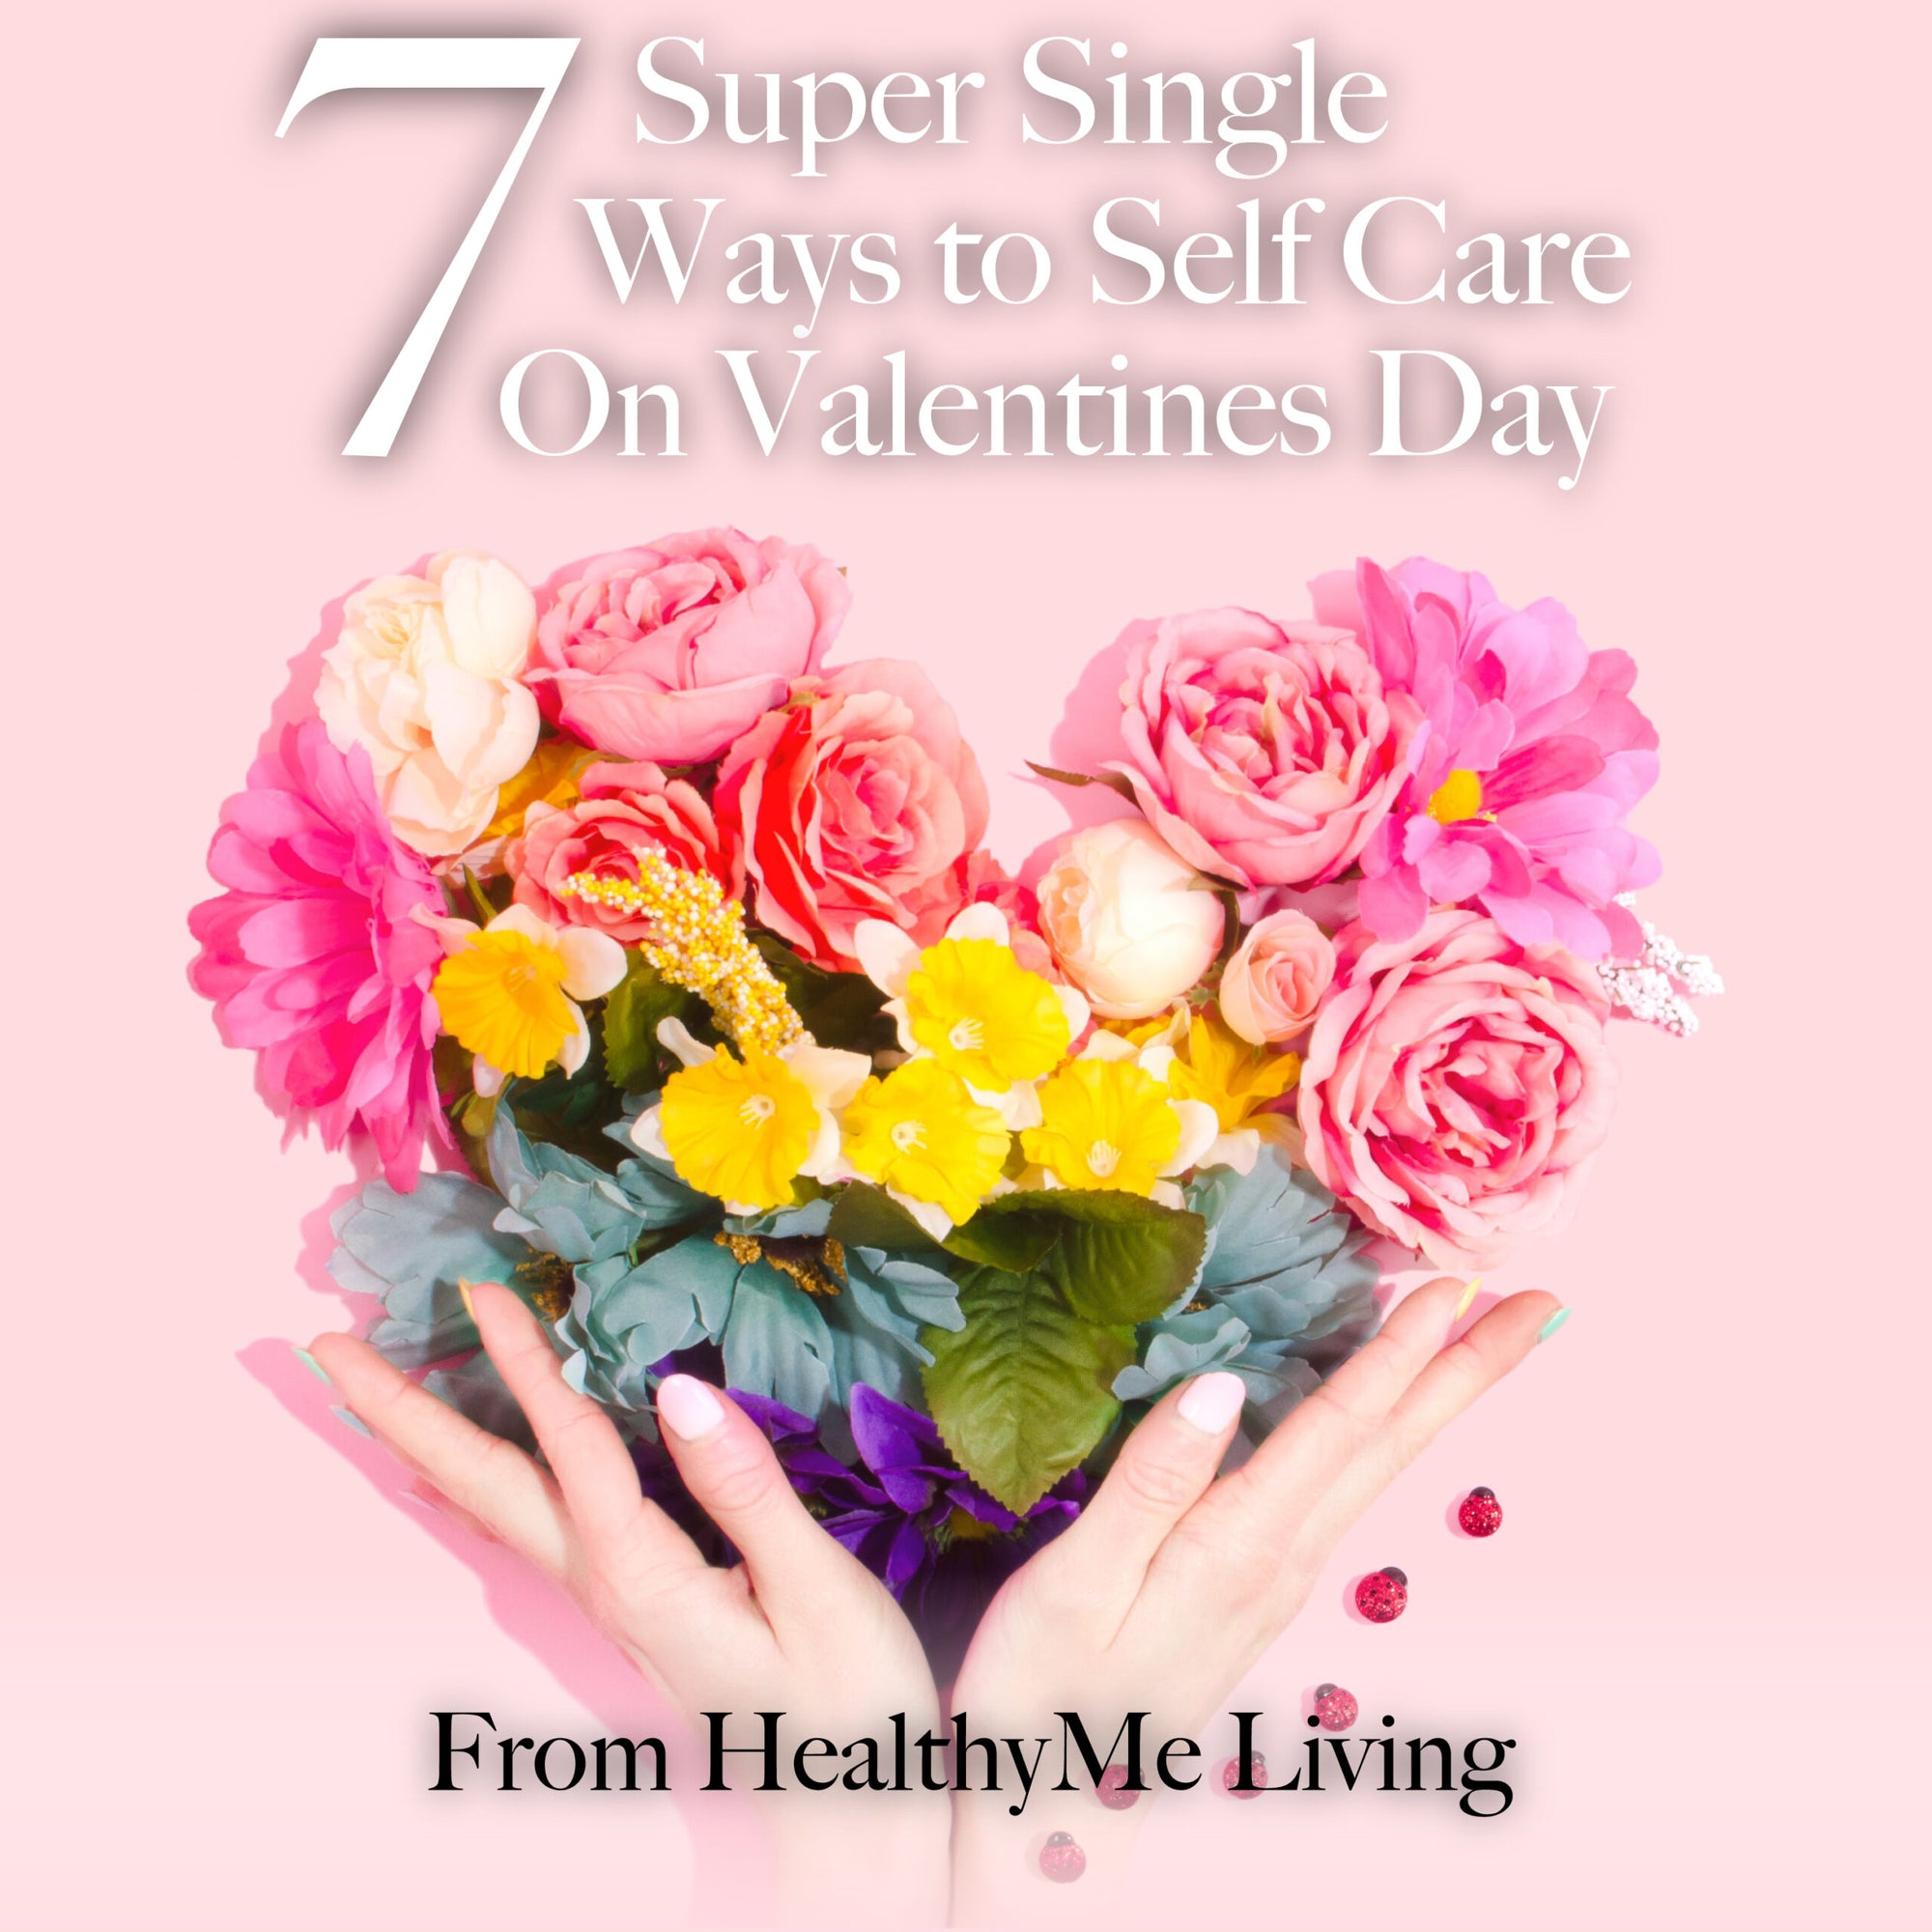 7 Super Single Ways to Self-Care on Valentines Day